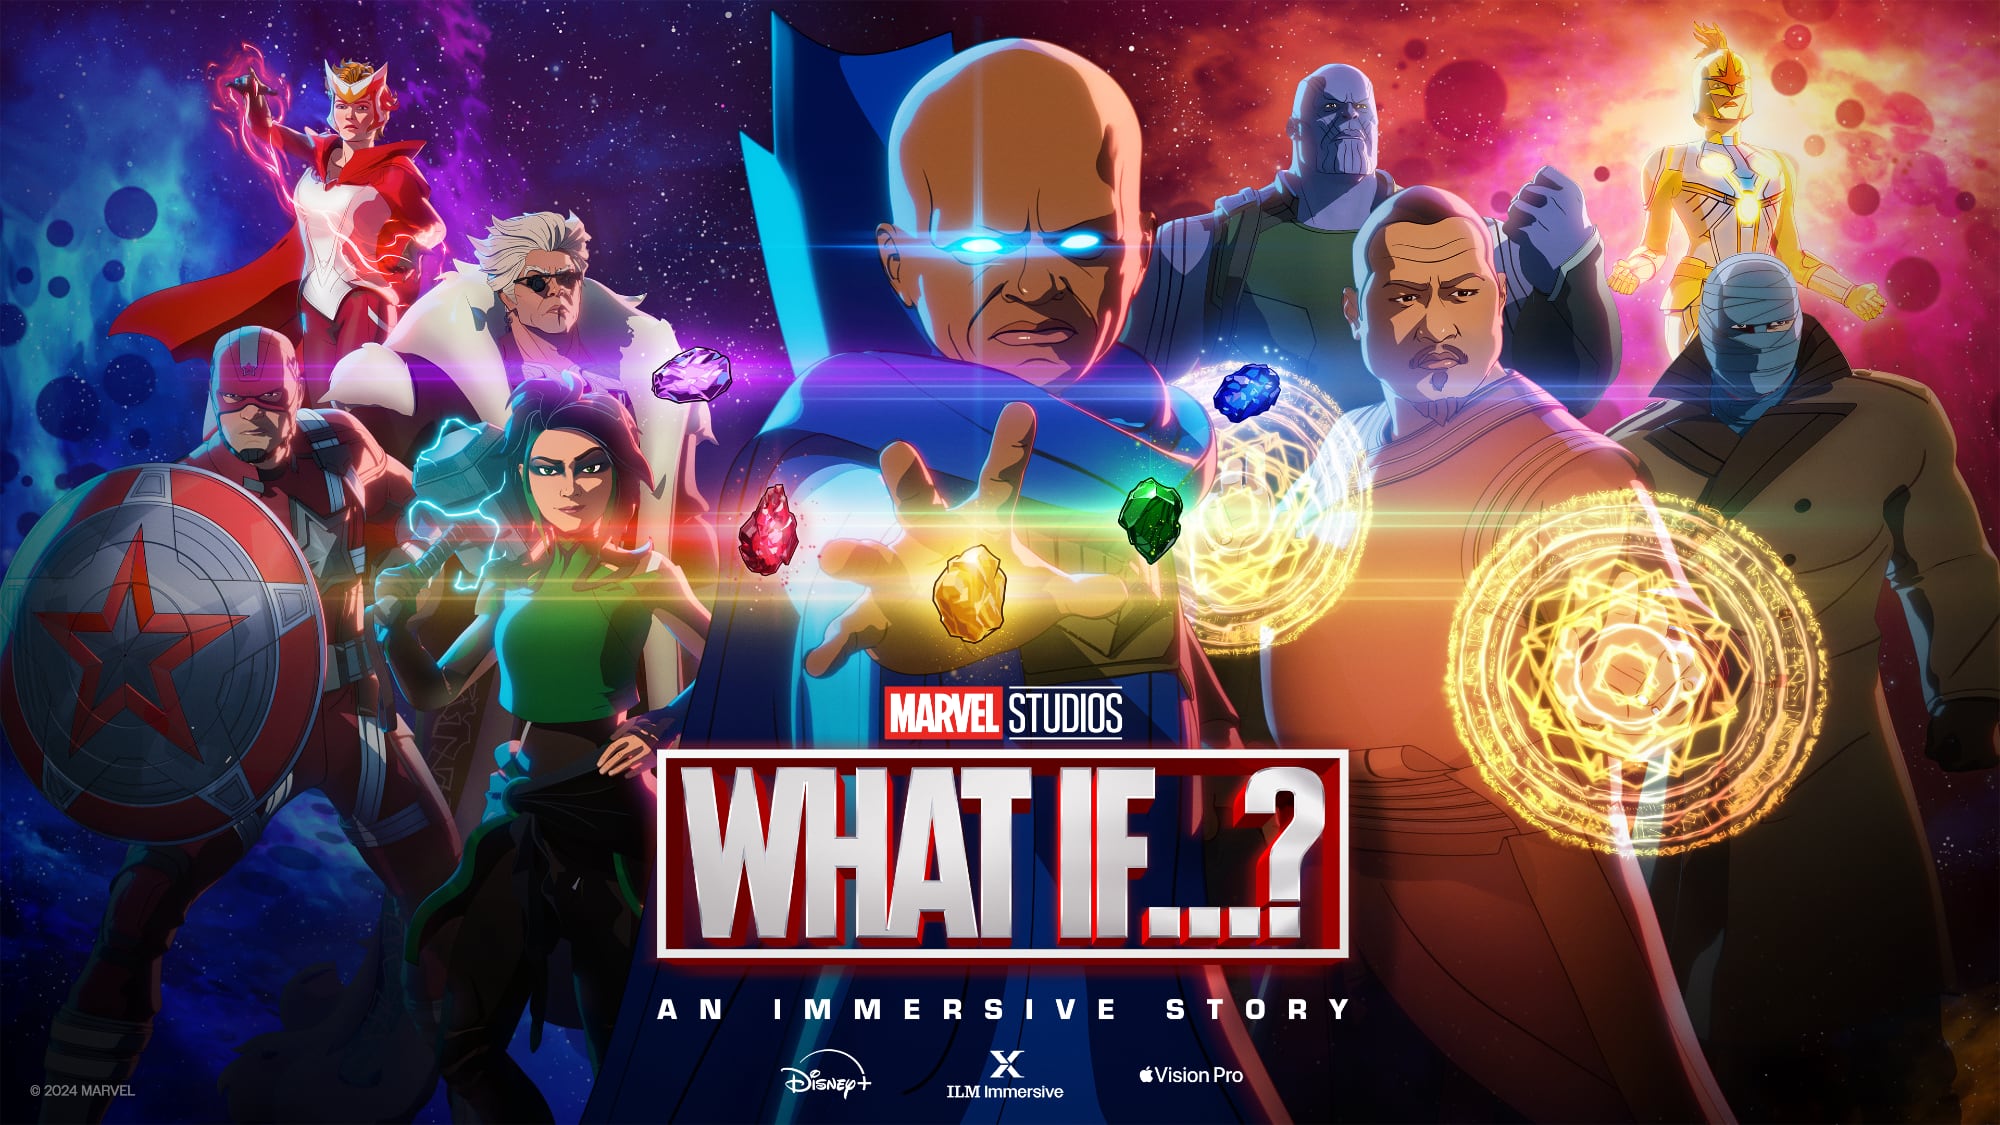 Disney+ Launching Exclusive Marvel Immersive Story for Apple Vision Pro